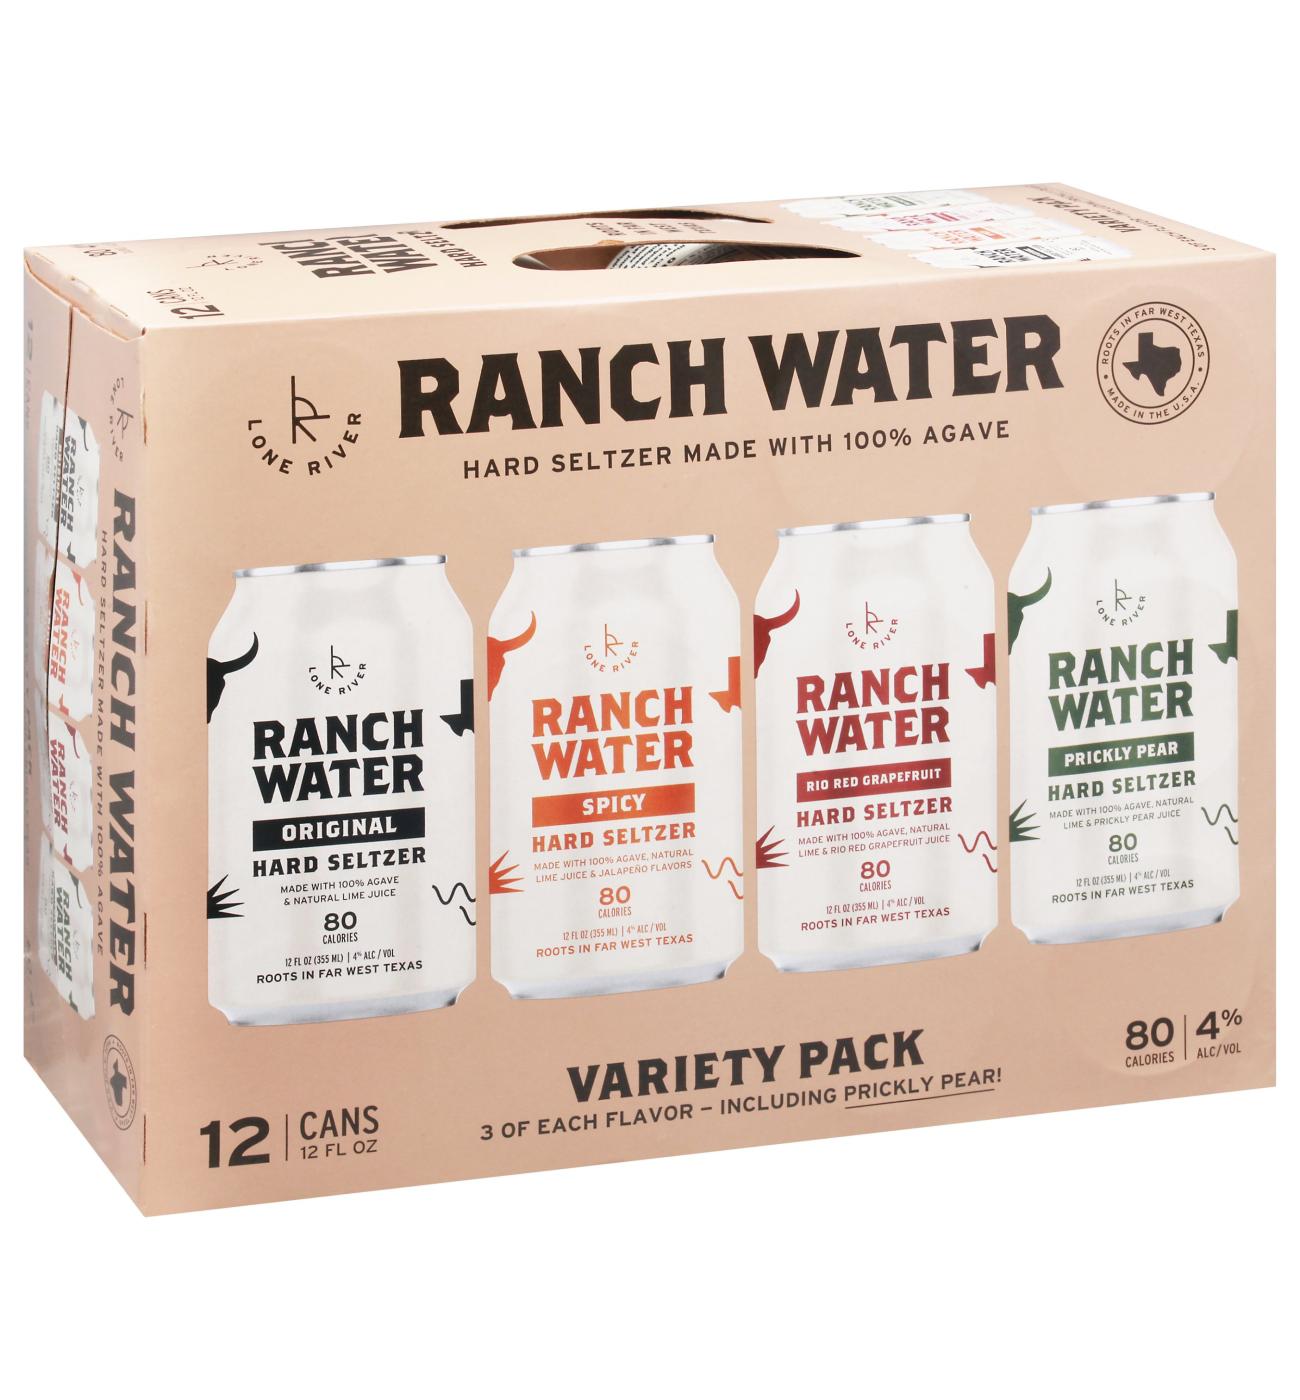 Lone River Ranch Water Hard Seltzer Variety Pack 12 pk Cans; image 1 of 4